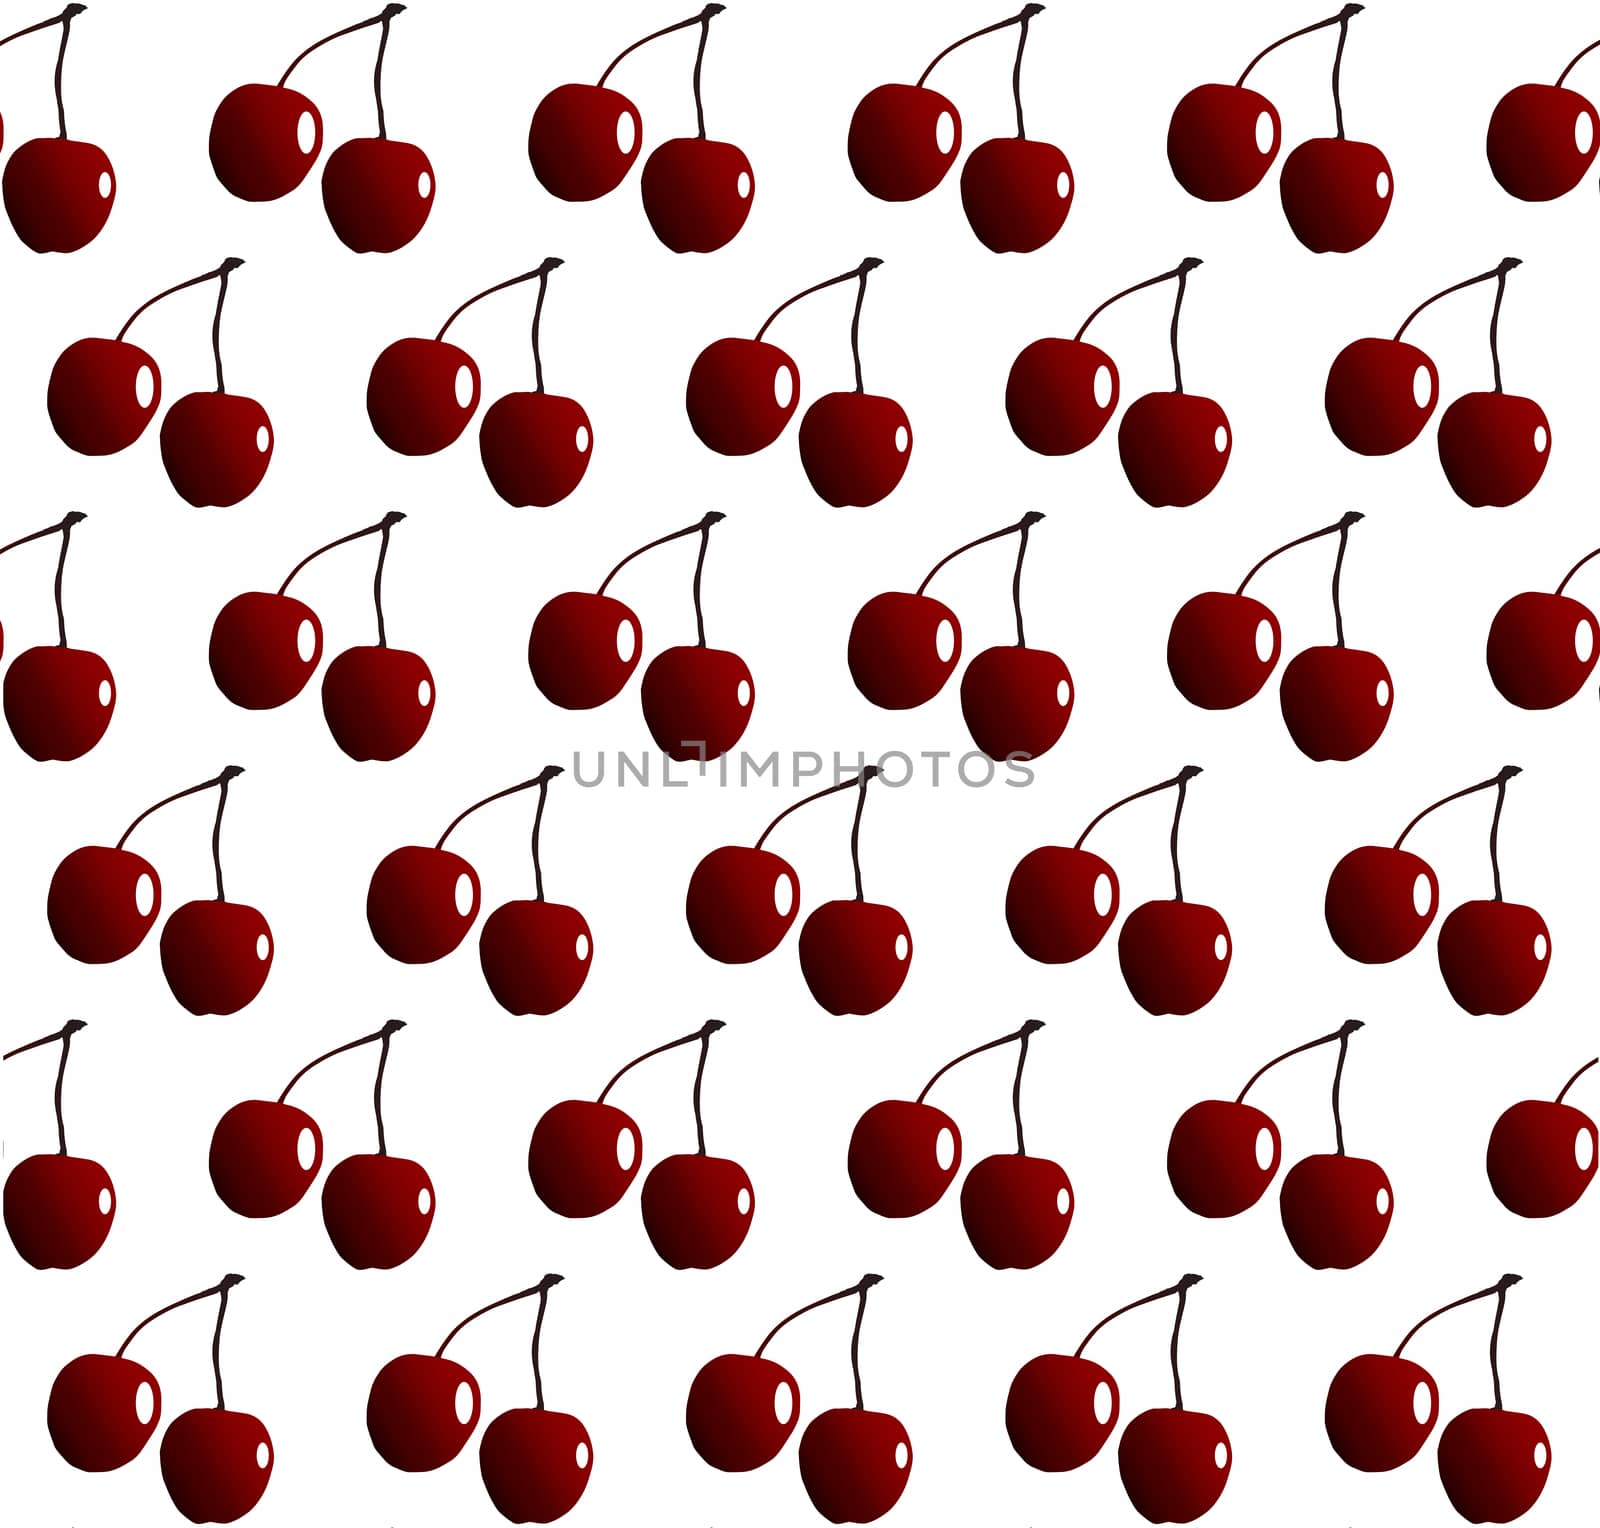 Two cheries with stalks in rows as a seamless pattern isolated on a white background